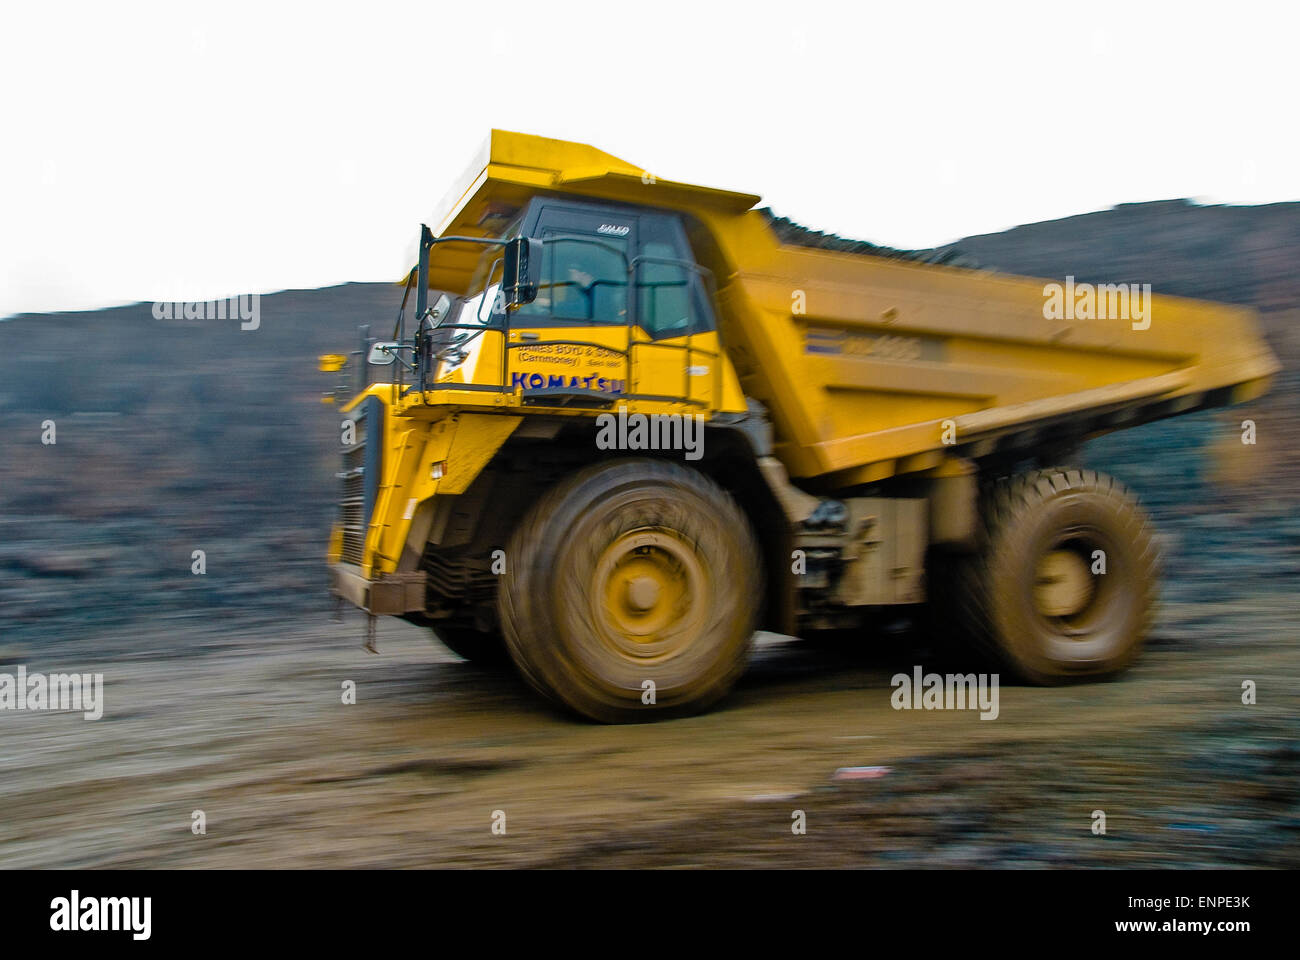 Komatsu 465 quarry truck, capable of moving up to 100 tonnes of rock at a quarry Stock Photo